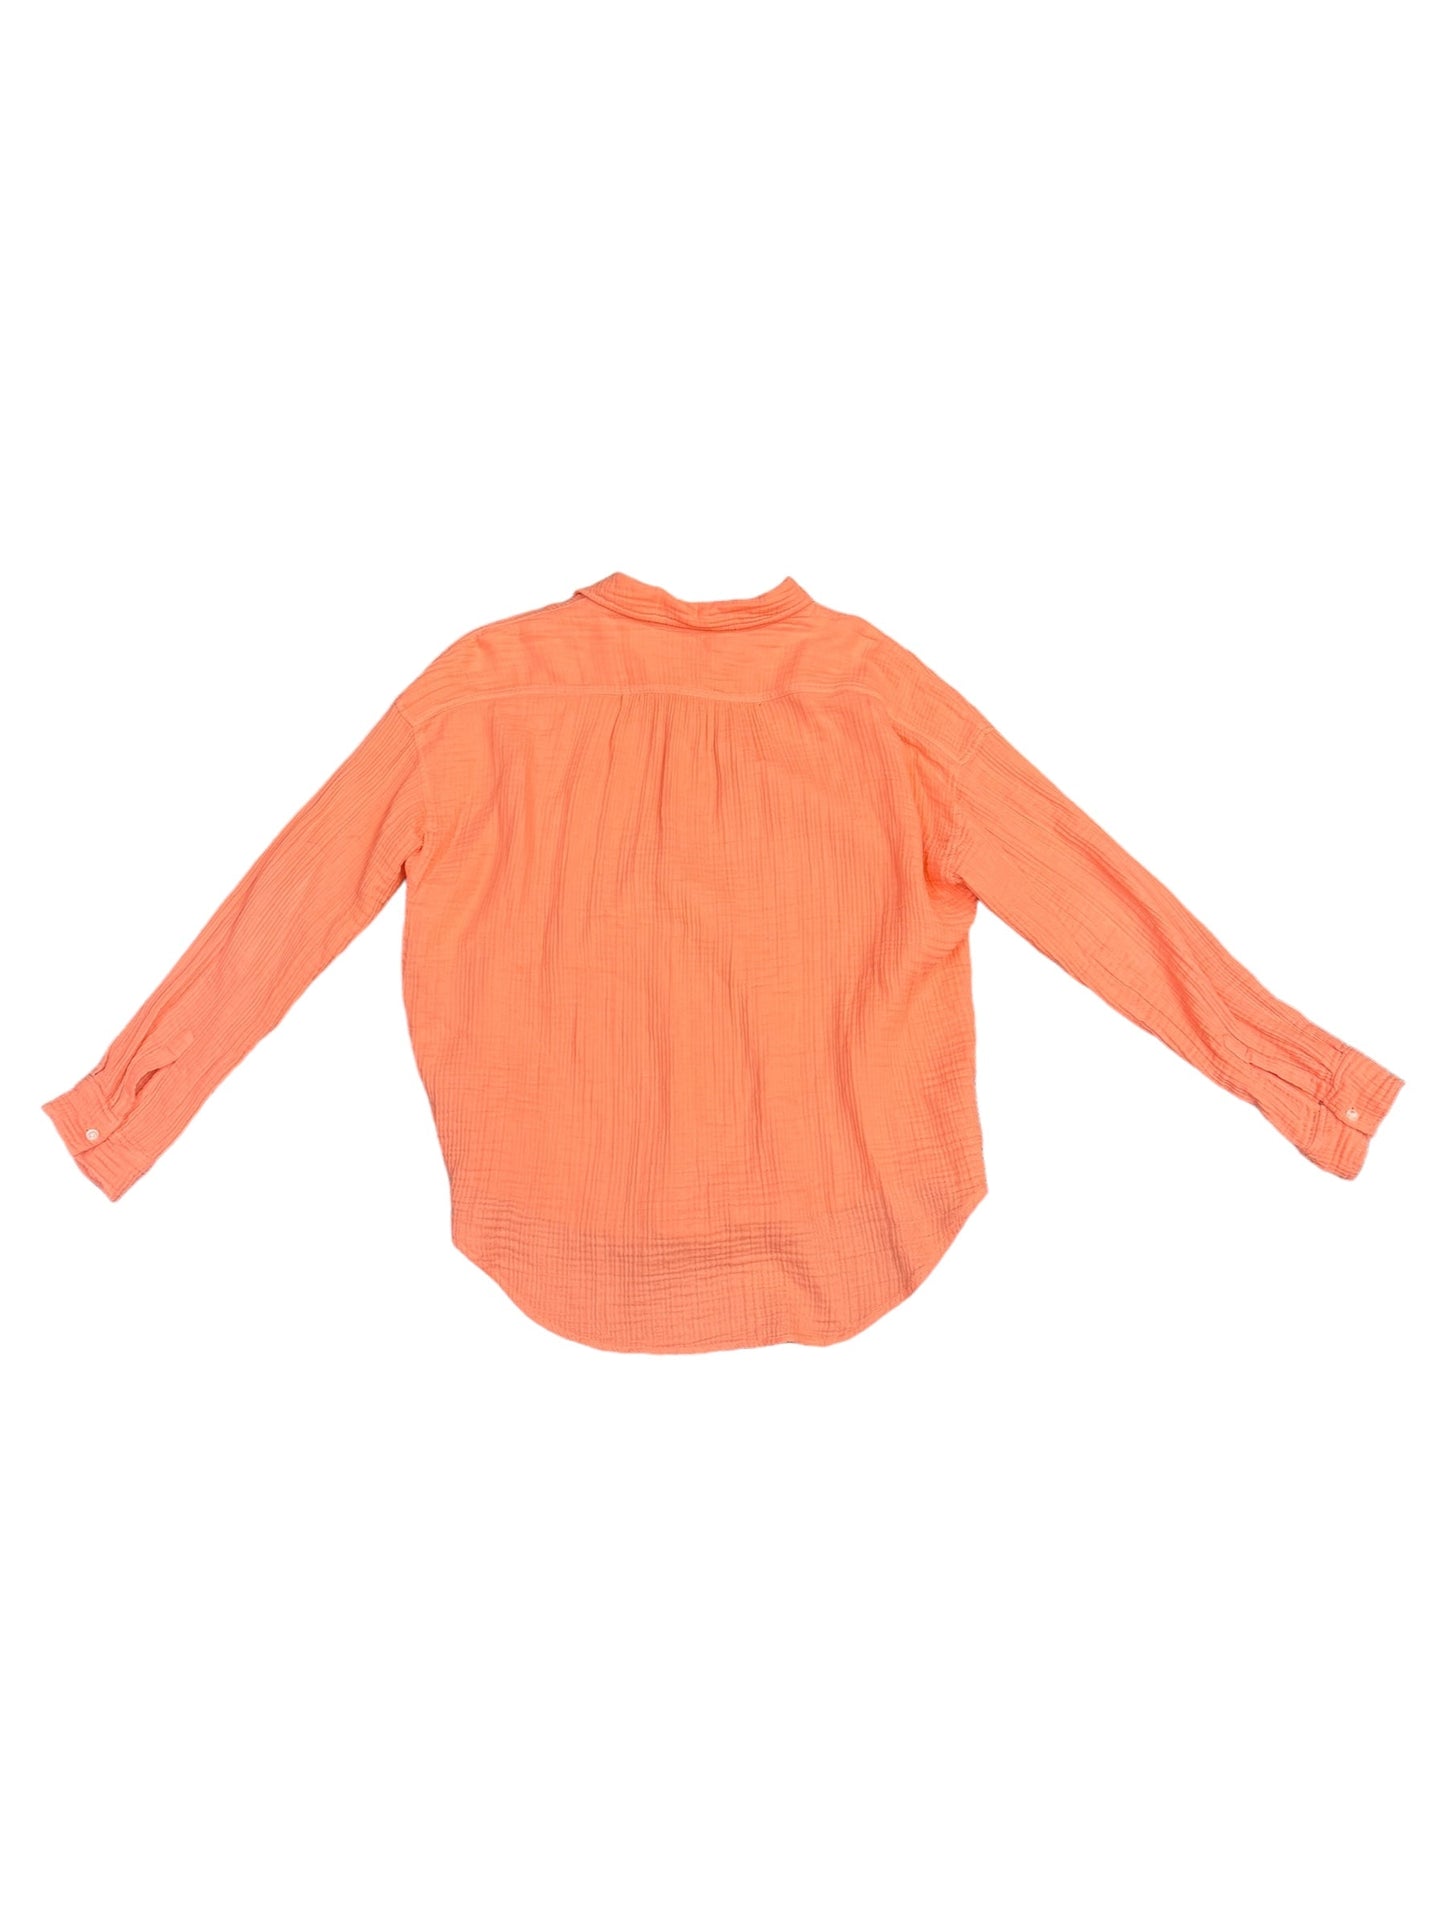 Coral Top Long Sleeve Lou And Grey, Size Xl